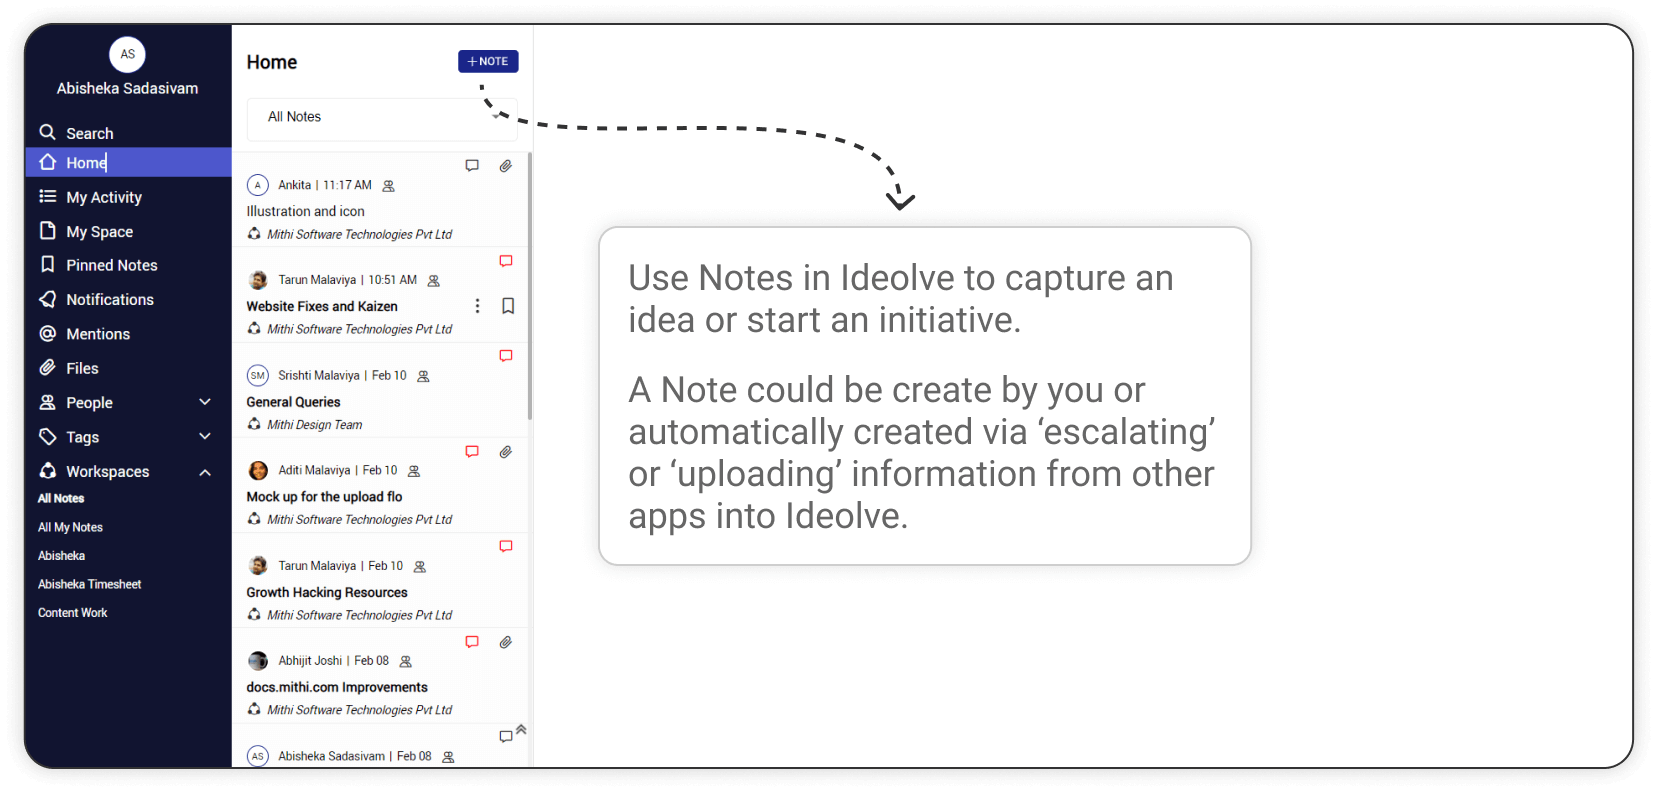 Use Notes in Ideolve to capture an idea or start an initiative.
    A Note could be create by you or automatically created via ‘escalating’ or ‘uploading’ information from other apps into Ideolve.